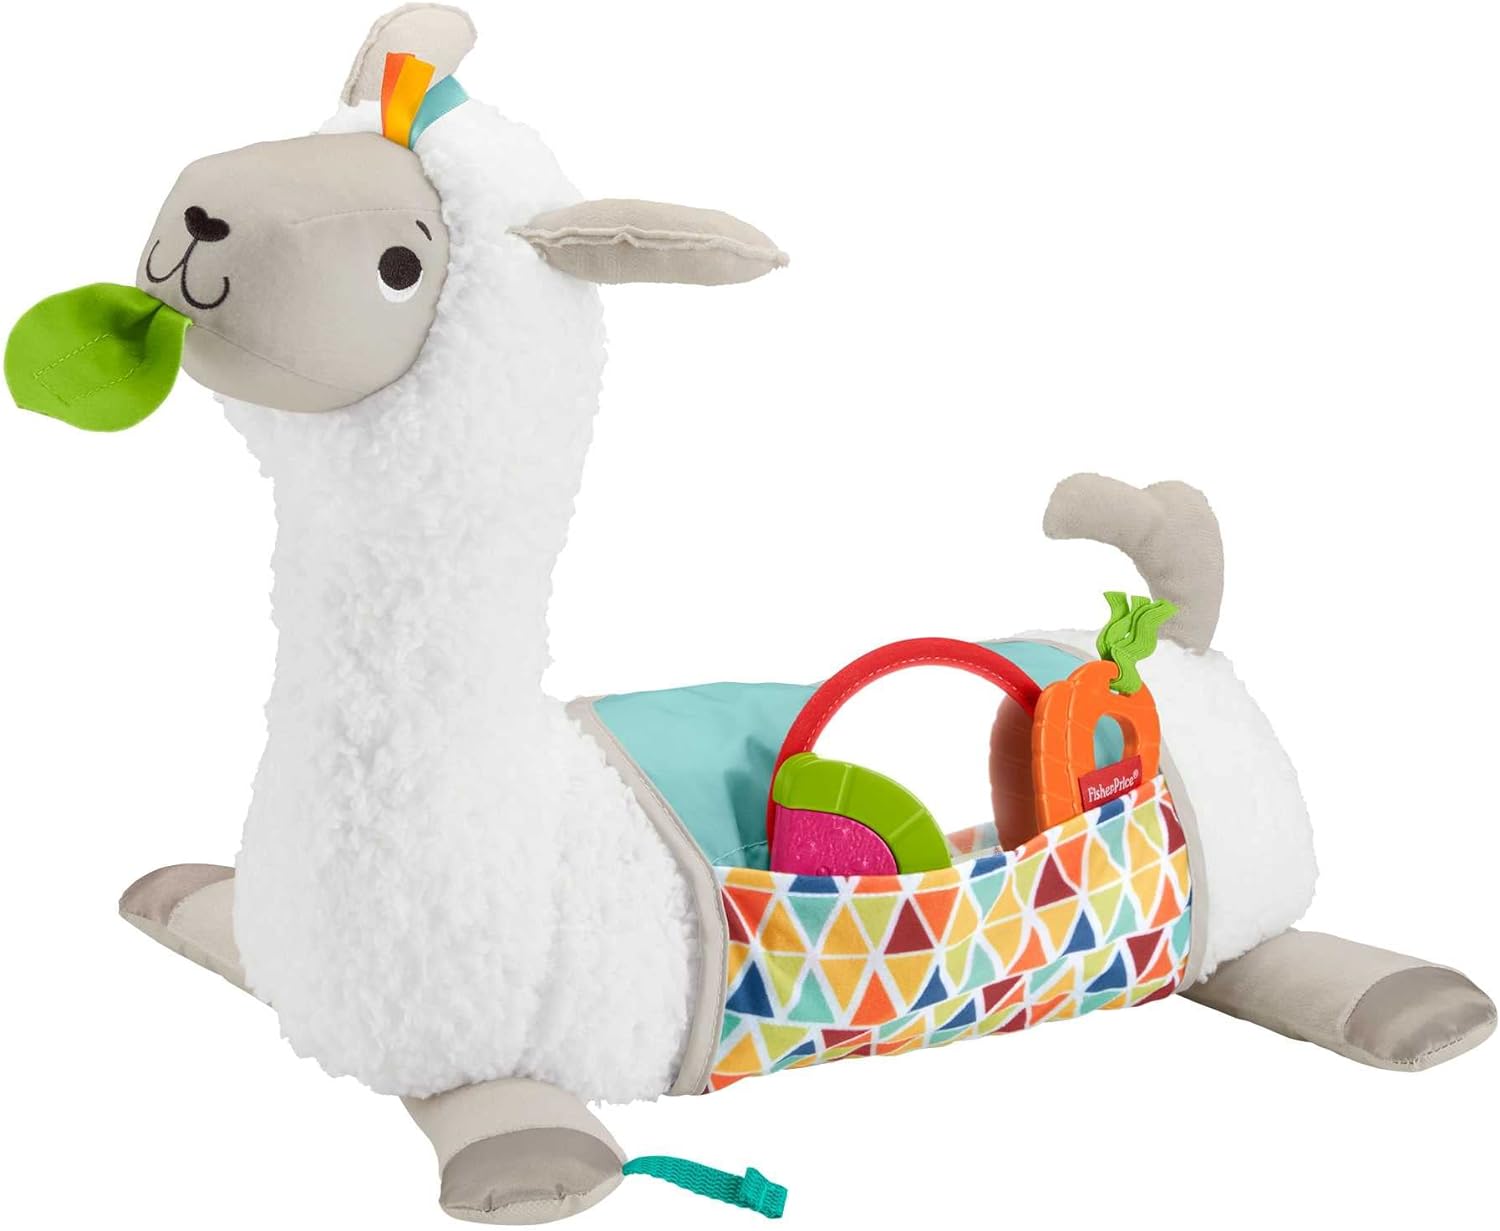 Fisher-Price Tummy Time Llama Plush, Grow-with-Me Baby Toy with Rattle, Mirror & Teether for Sensory Play, GLK39